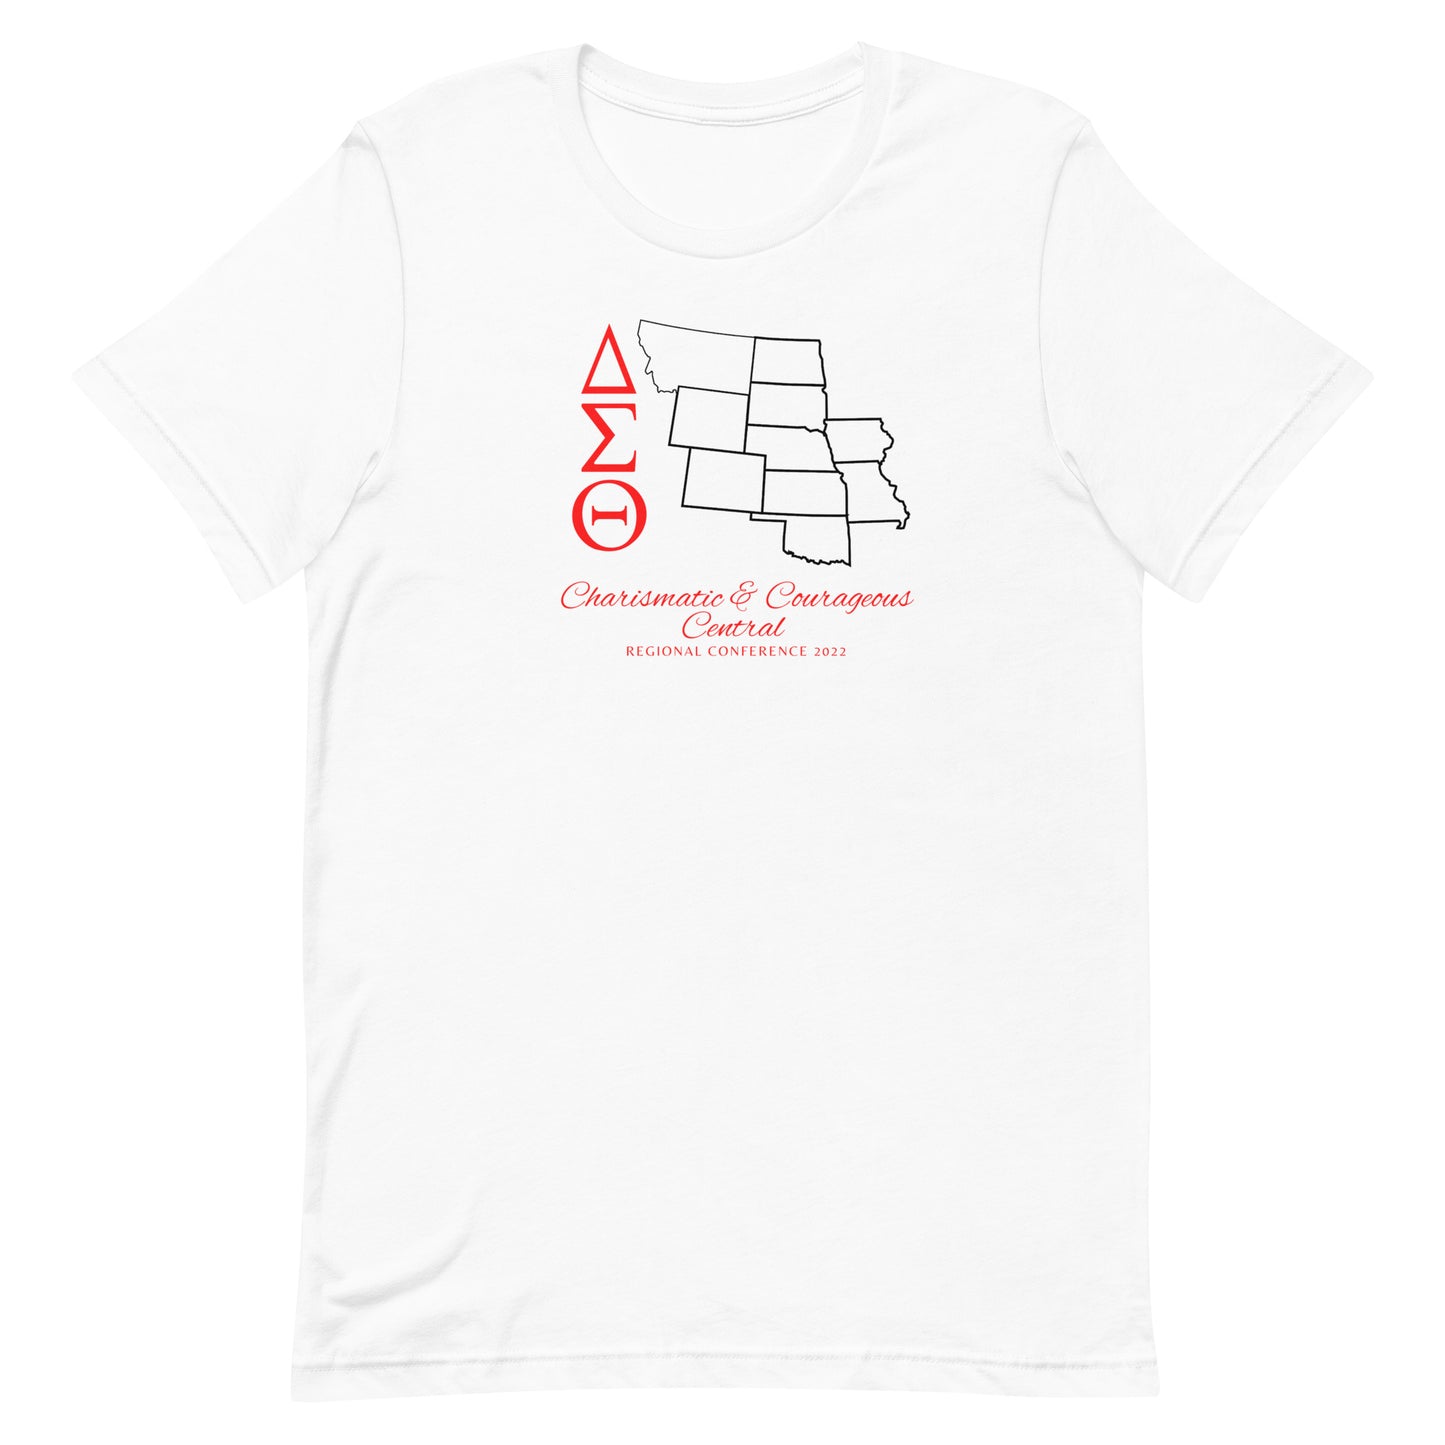 Central 2022 Regional Conference T-Shirt